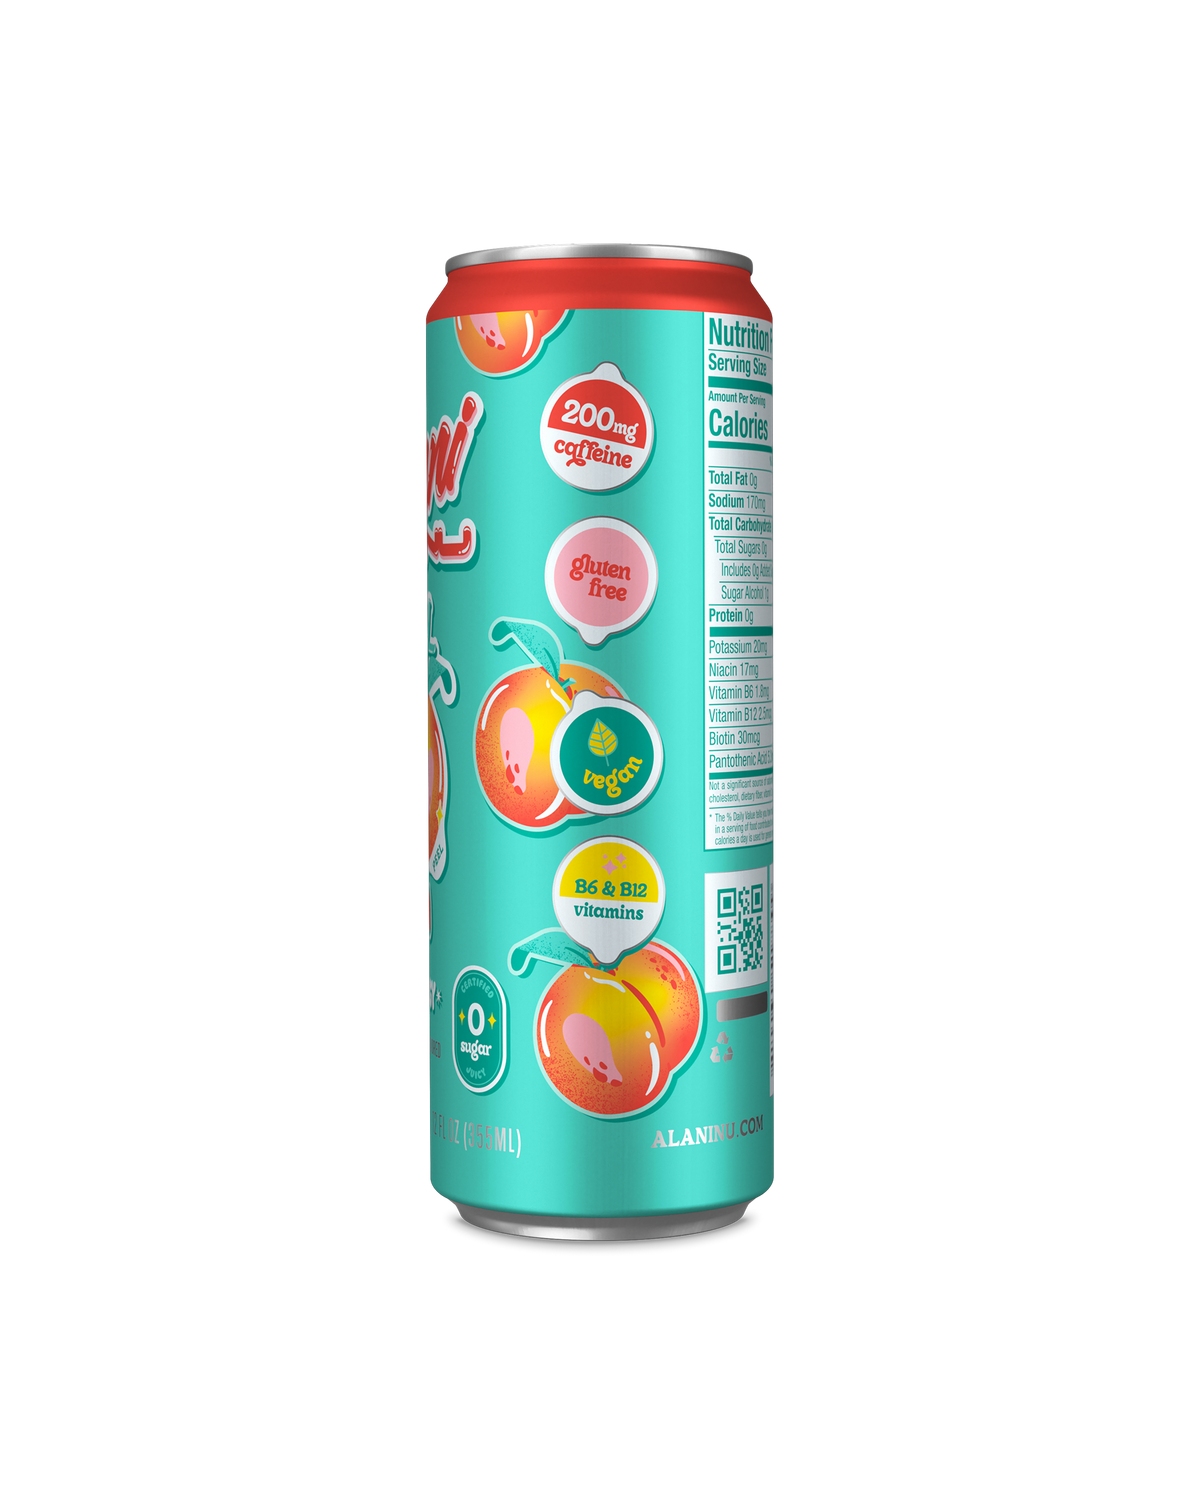 A side view of Energy Drink in Juicy Peach flavor showcasing suggested use of product.